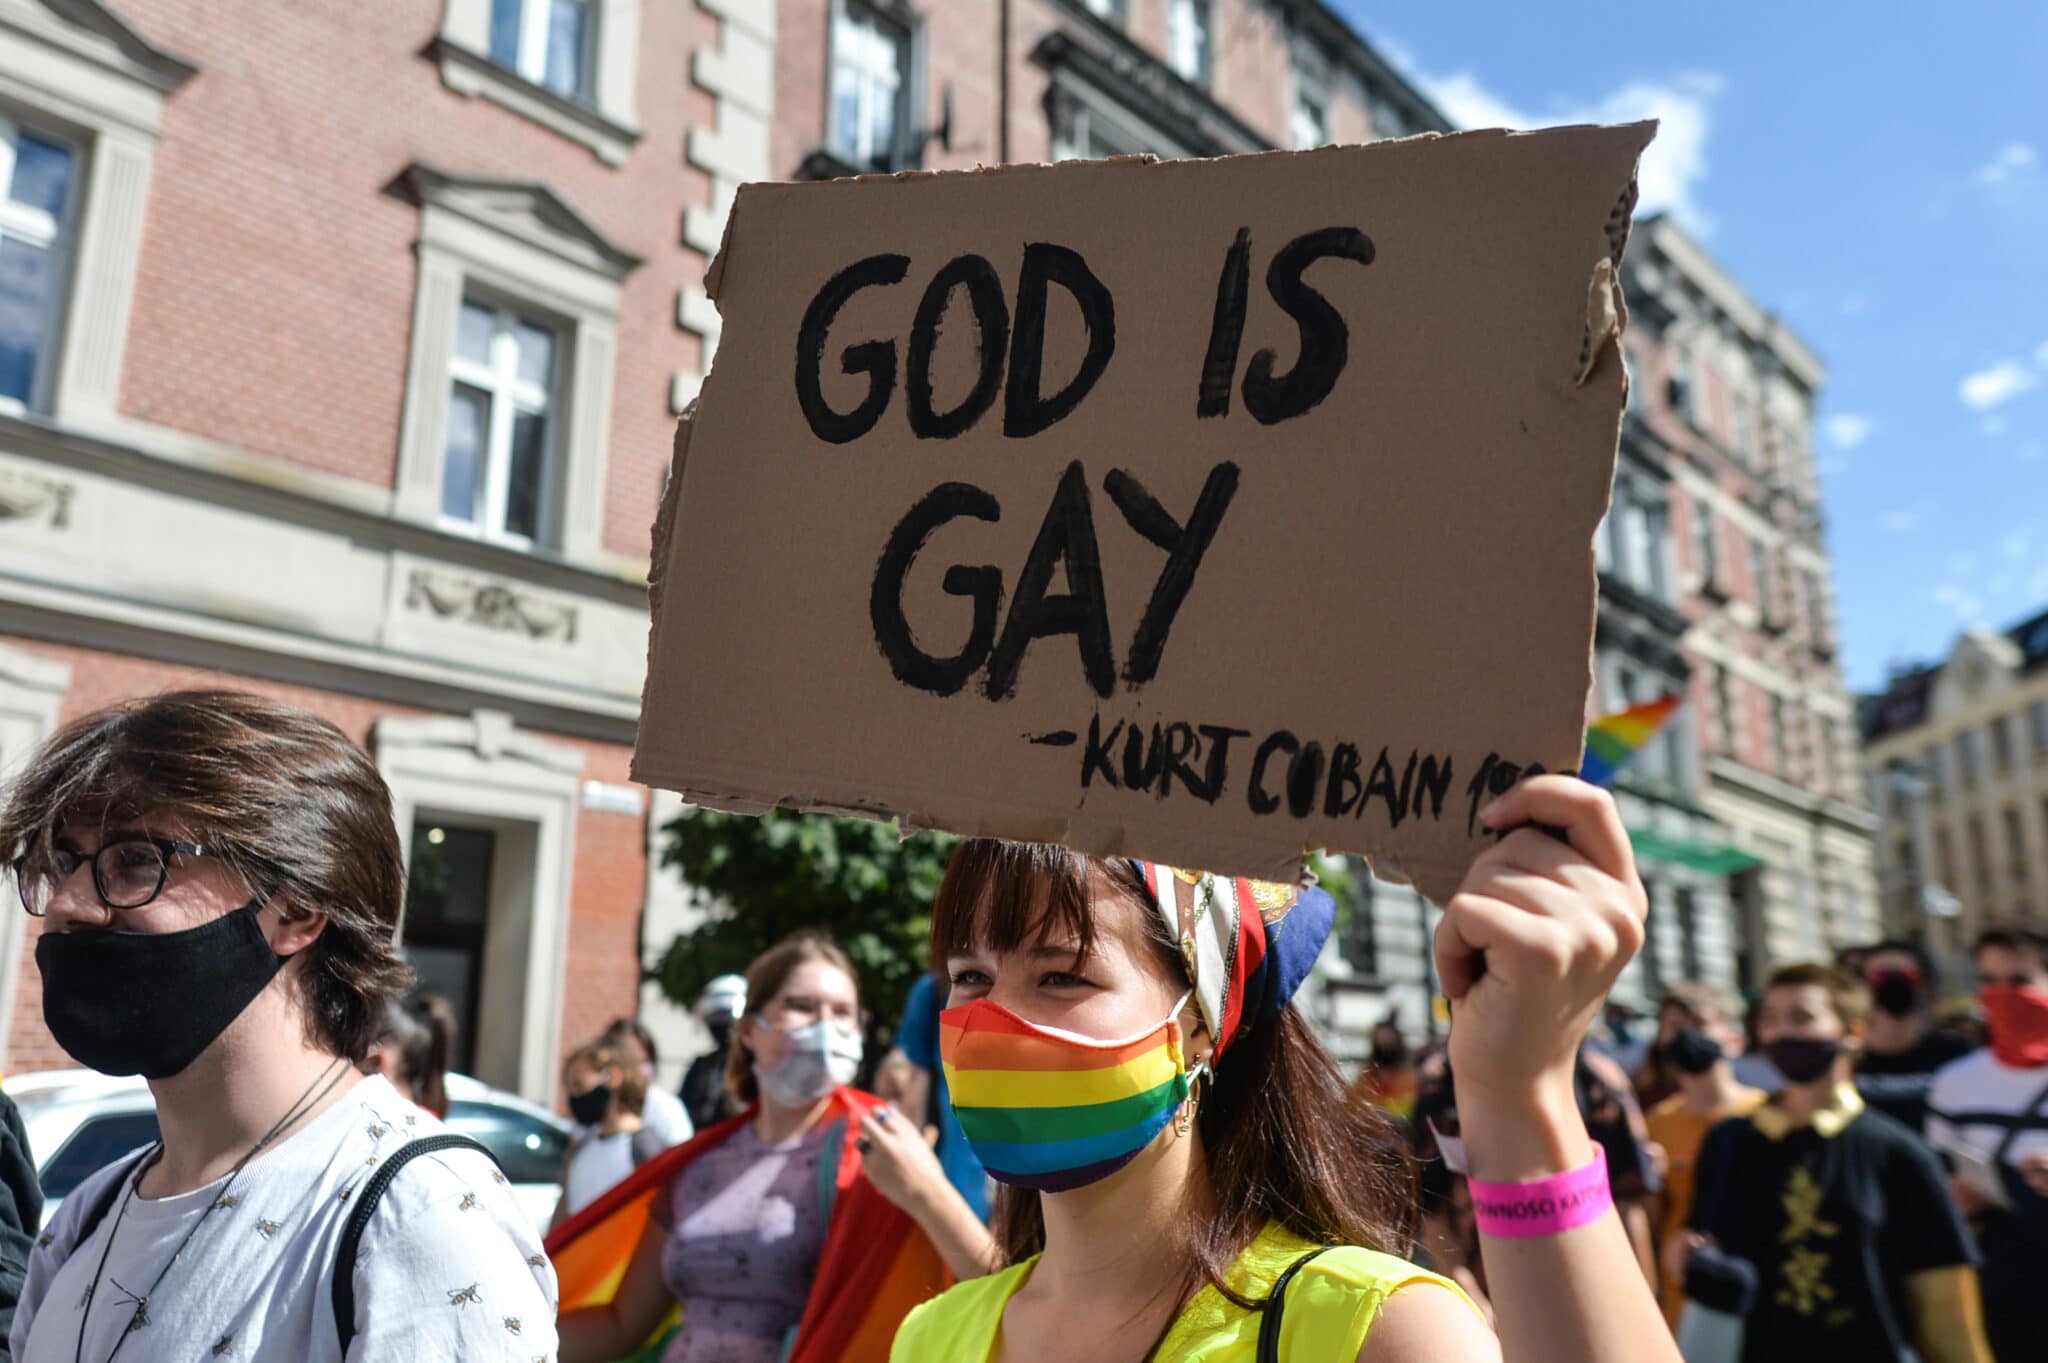 Conservative Christians think LGBT+ progress is an attack, study shows